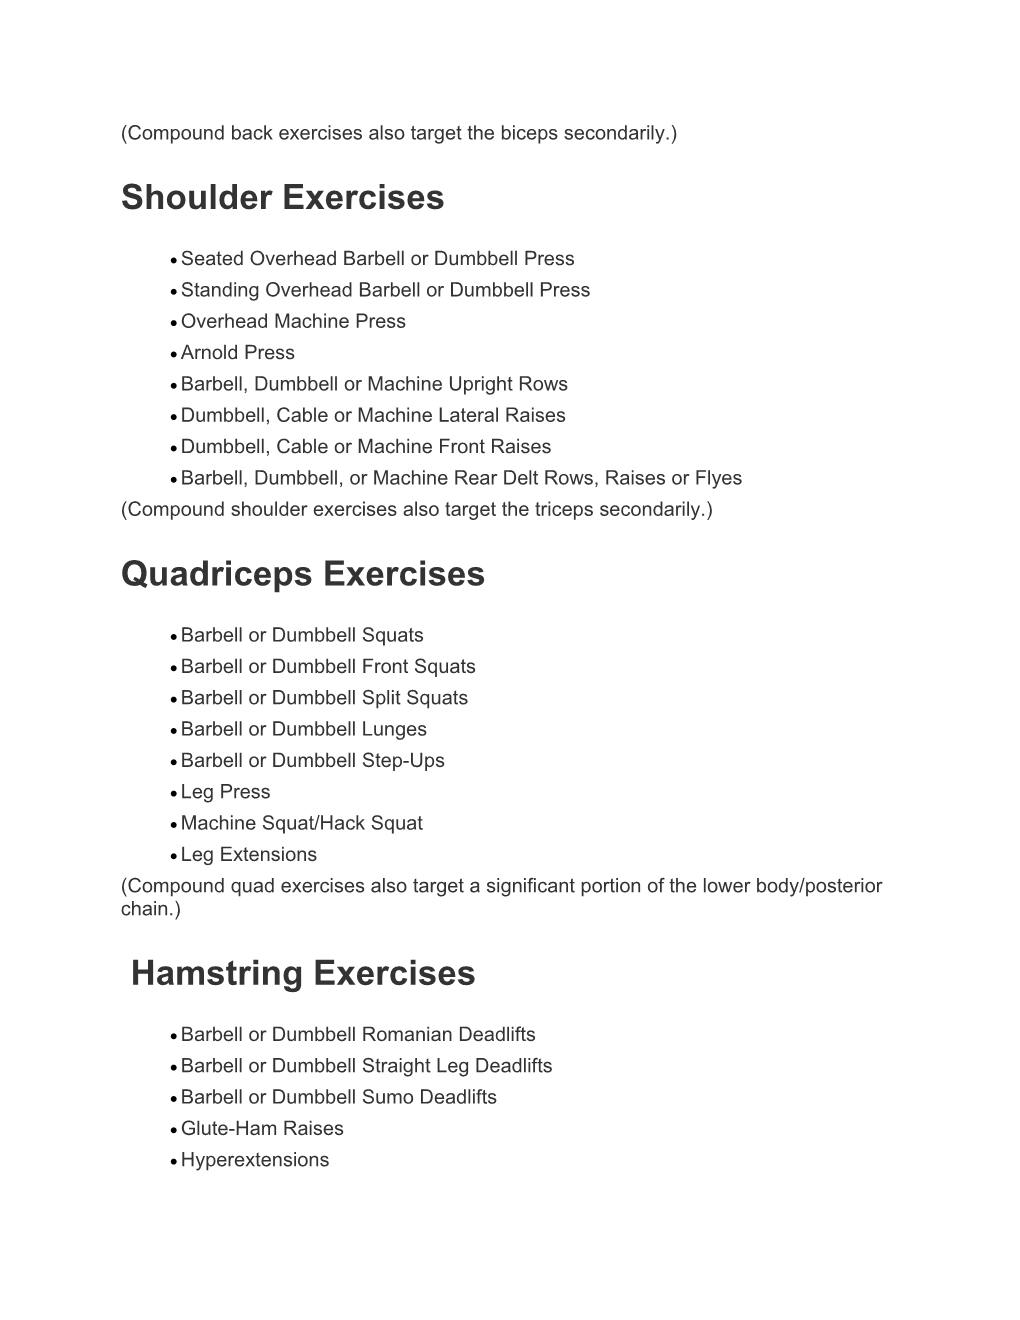 General Exercises For